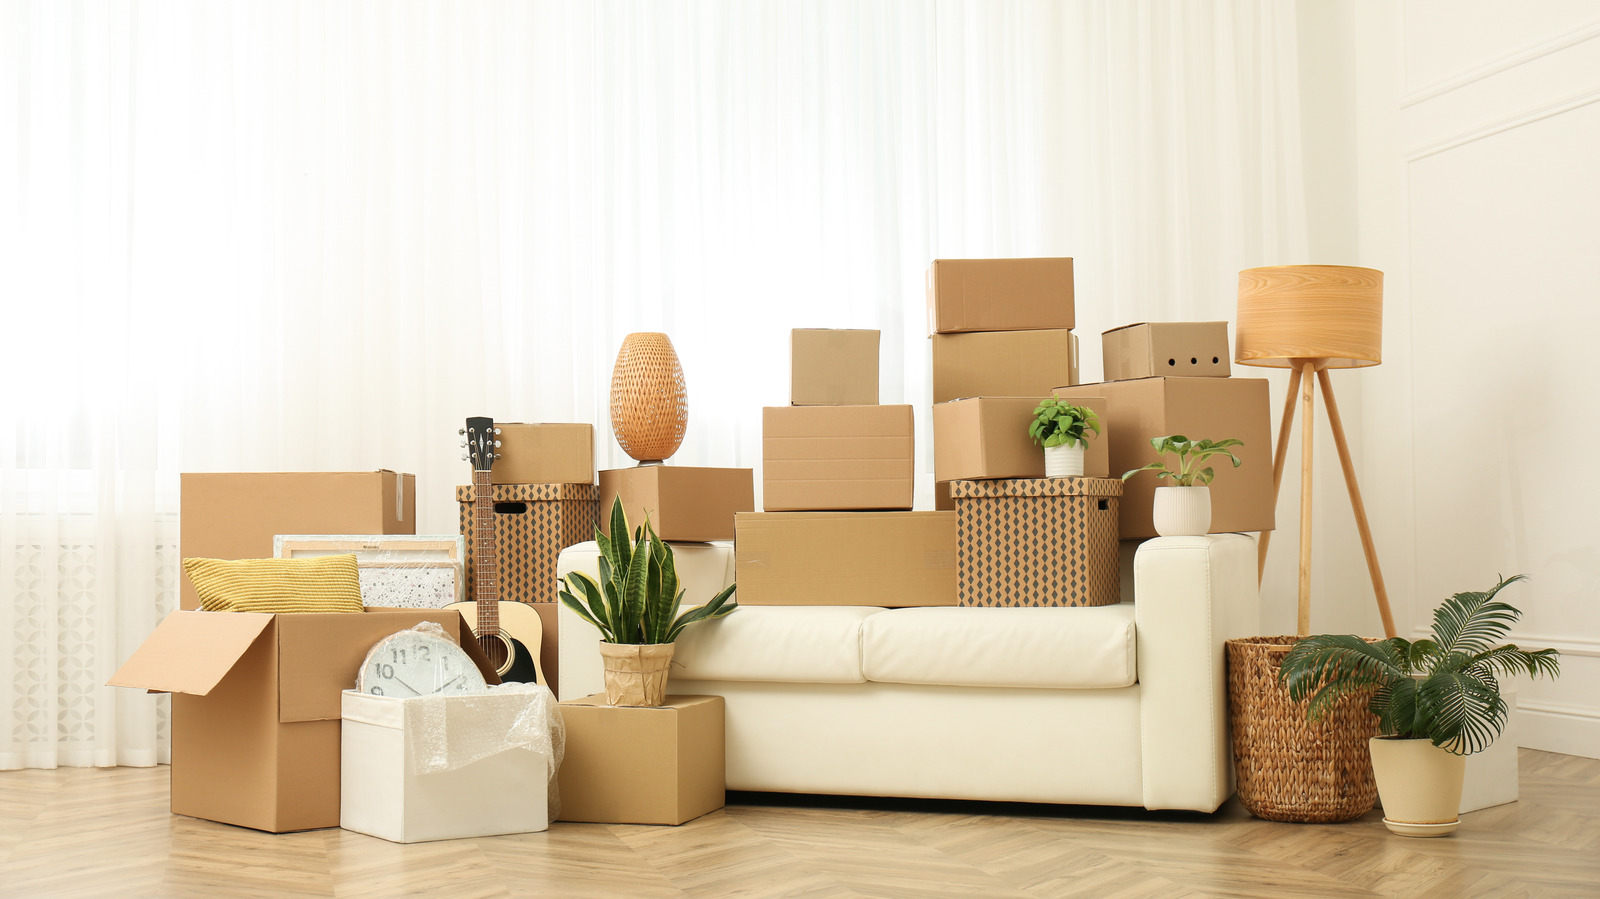 Lucky Dates You Should Consider When Moving To A New Home, According To